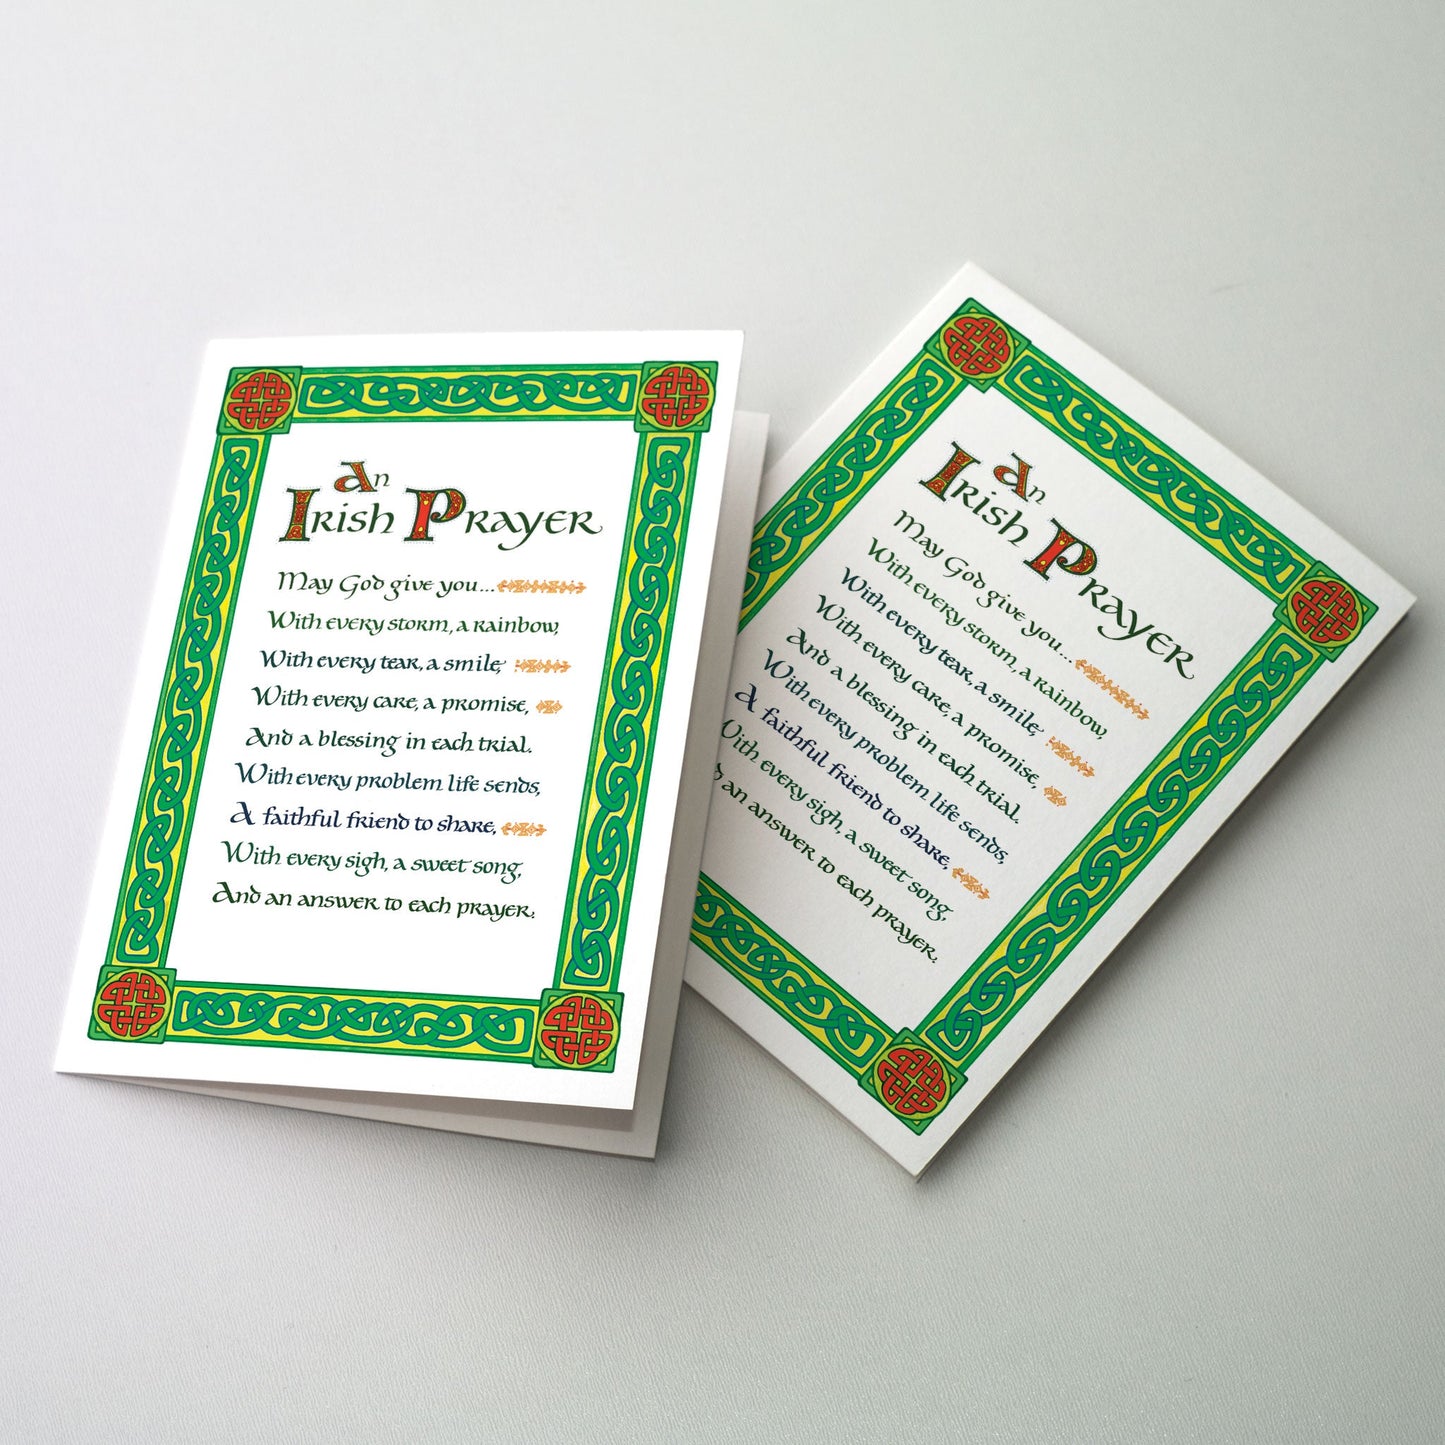 Celtic frame with illuminated initials Cards are printed on recycled paper and measure 5 x 7 inches with envelopes.